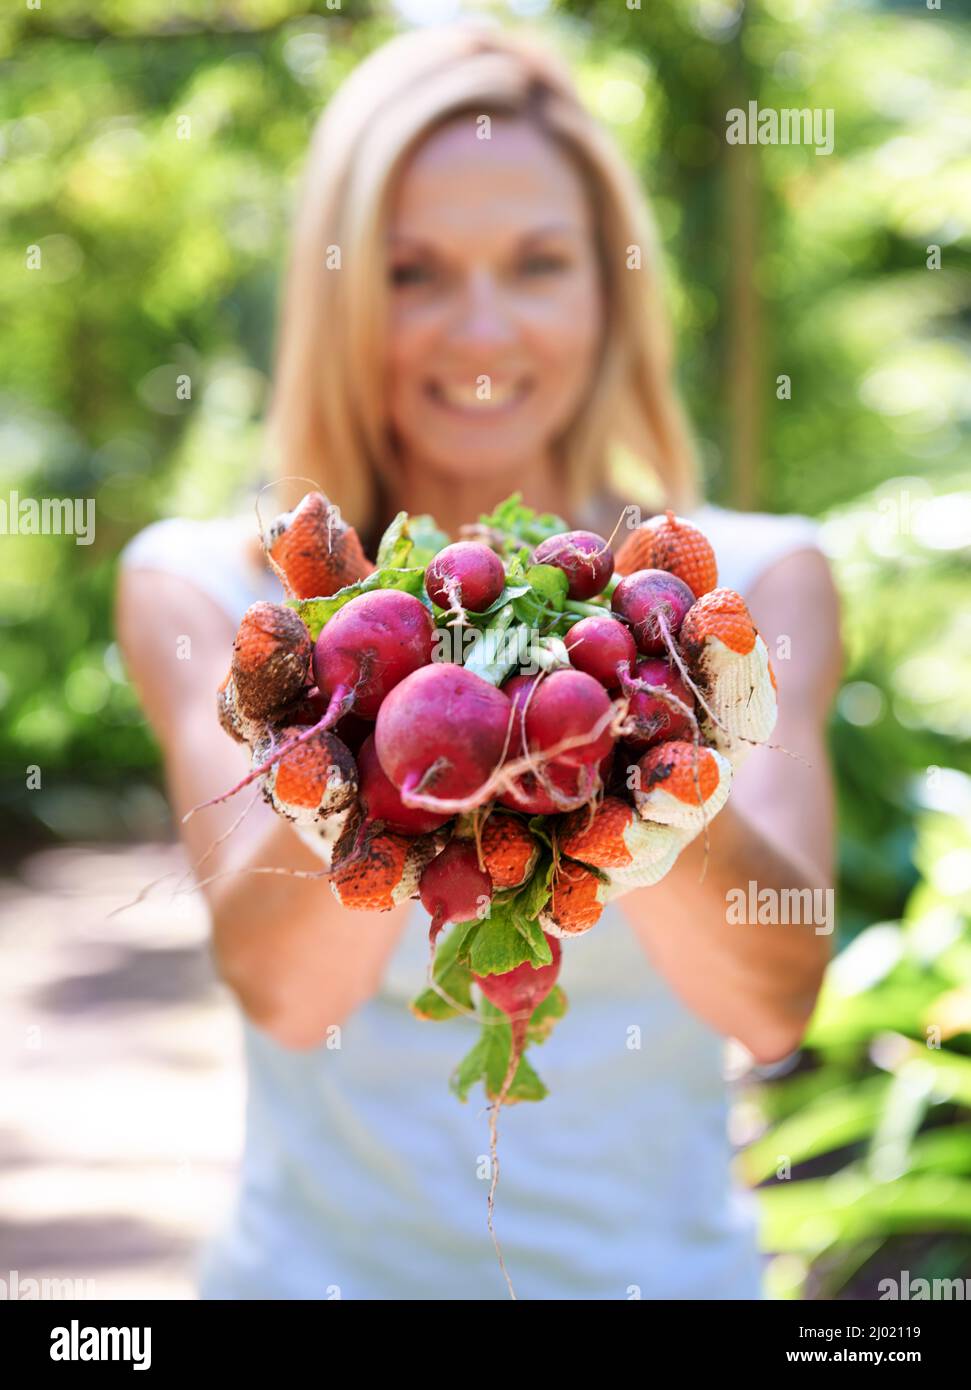 Heart health is in her hands. A woman holding out freshly picked vegetables. Stock Photo